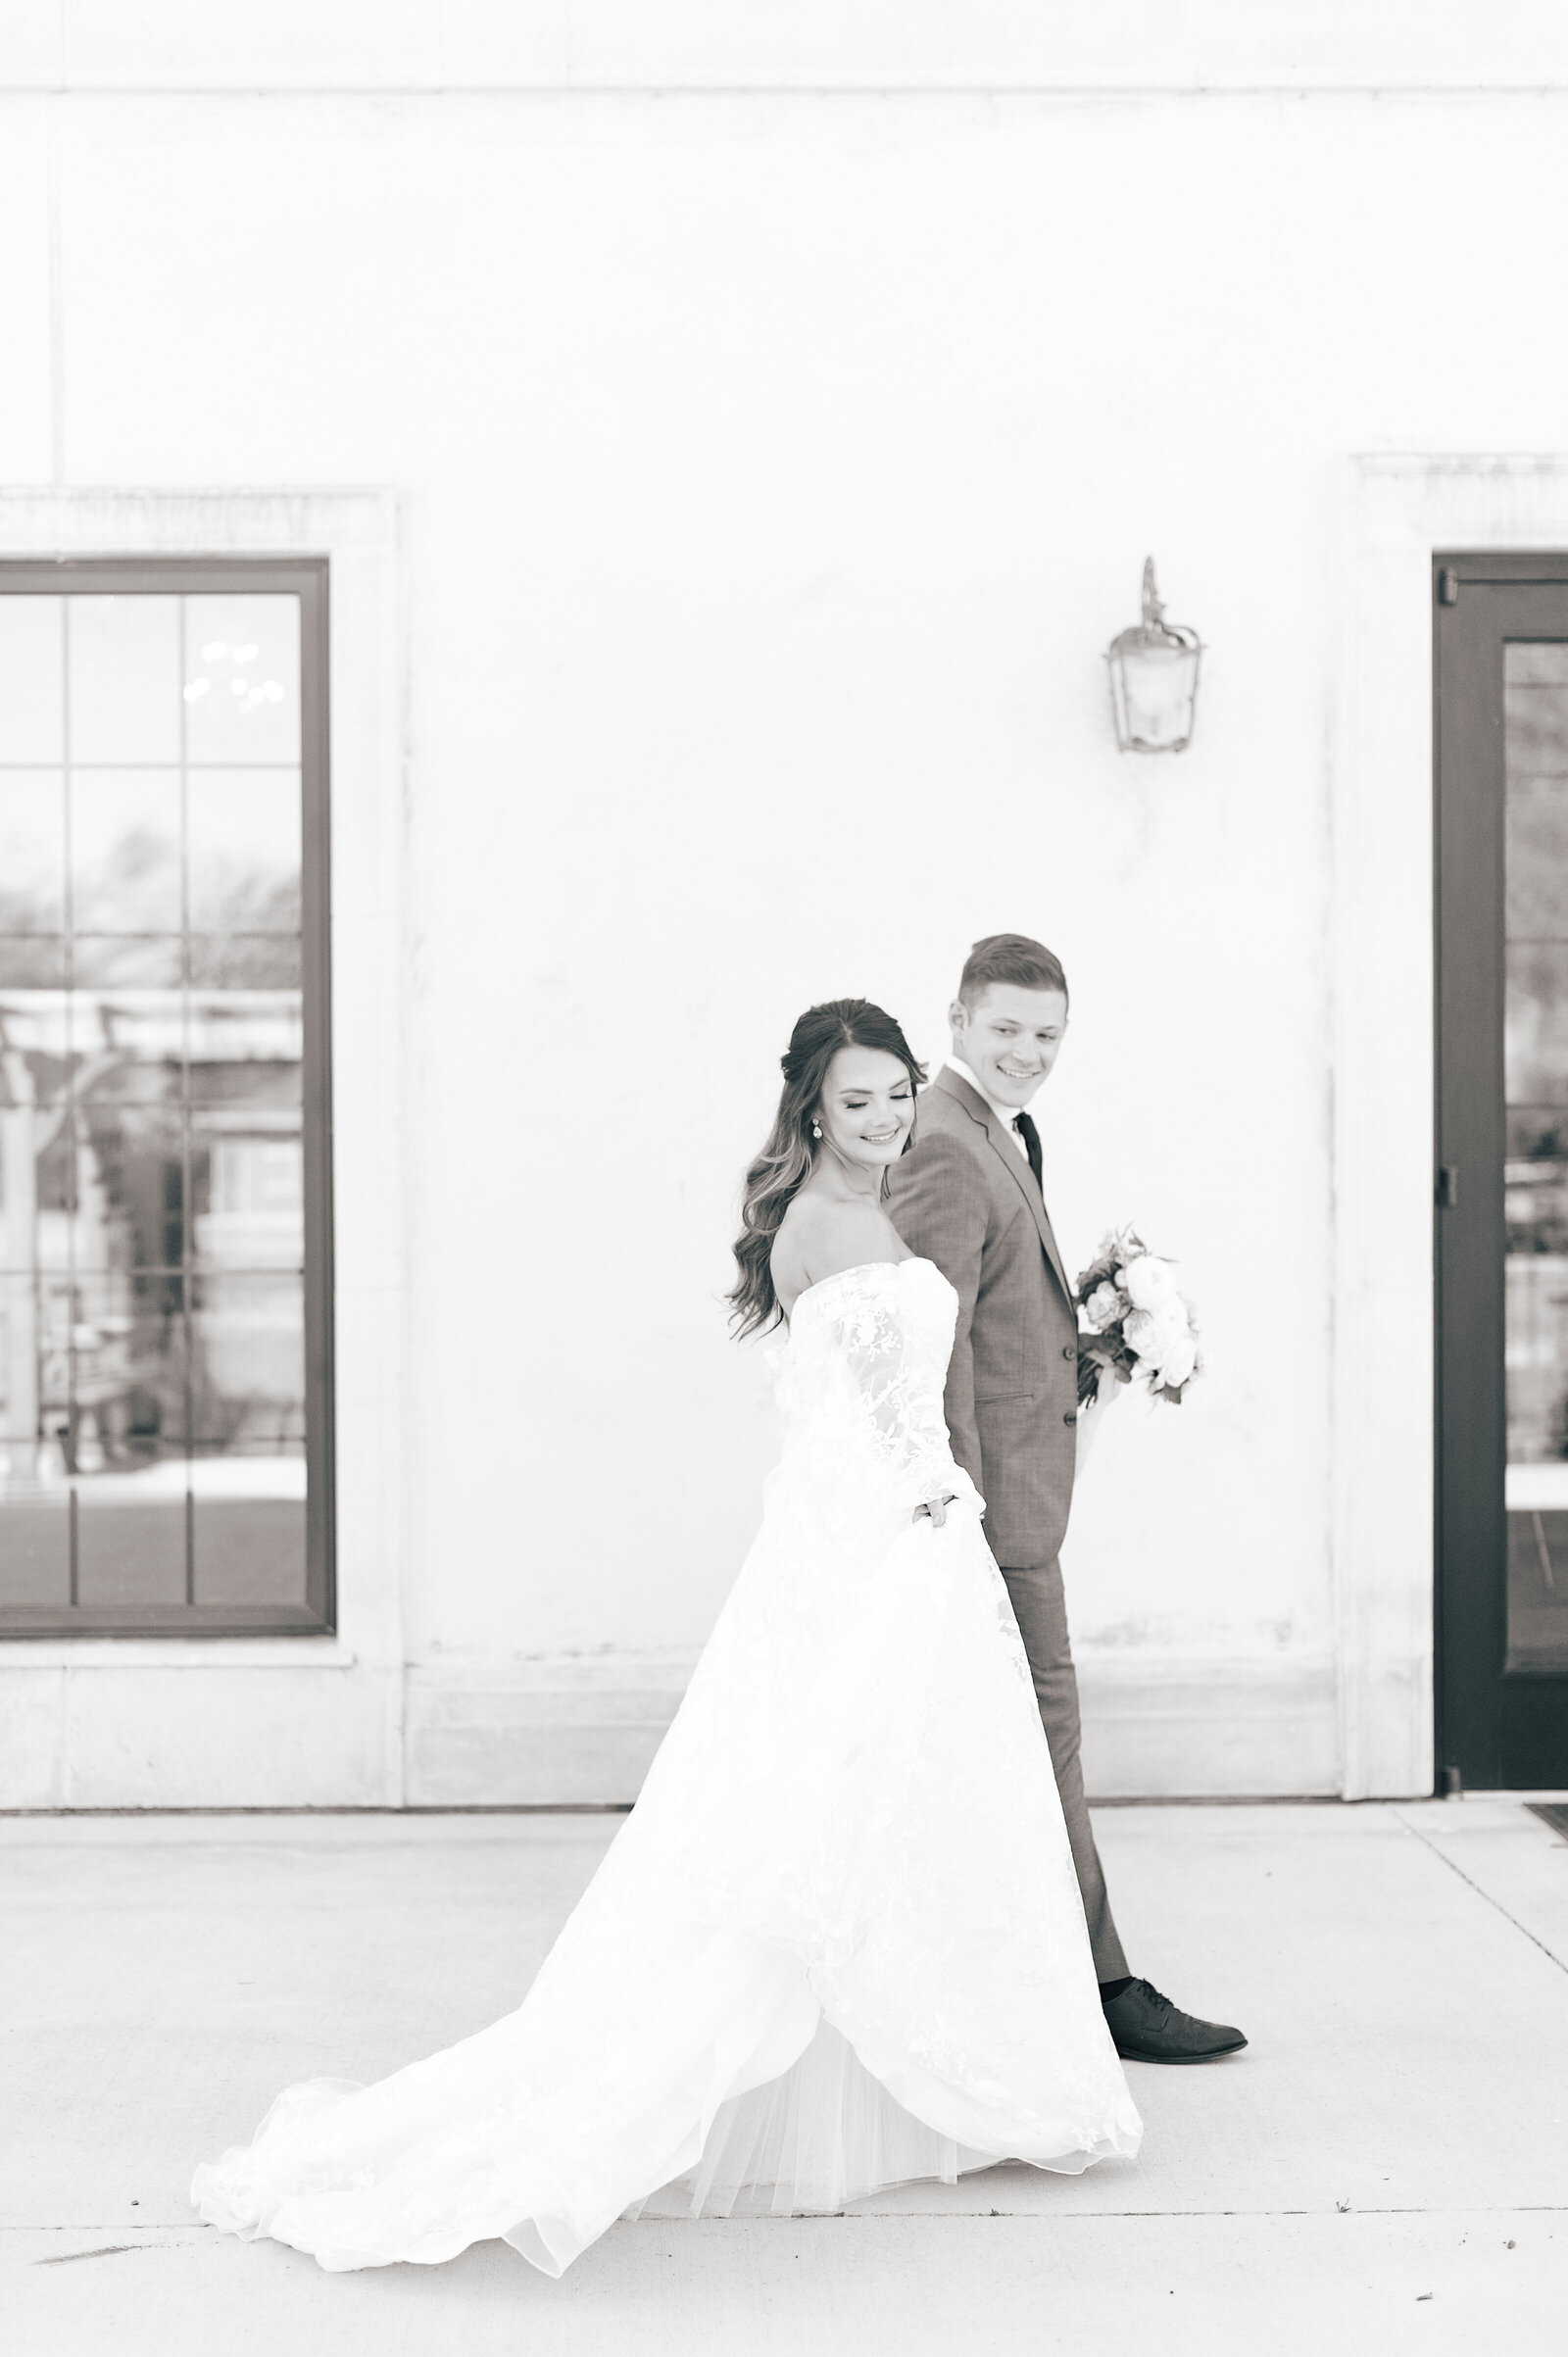 Chateau Des Fleurs Wedding bride and groom walking outside white stucco building in black and white